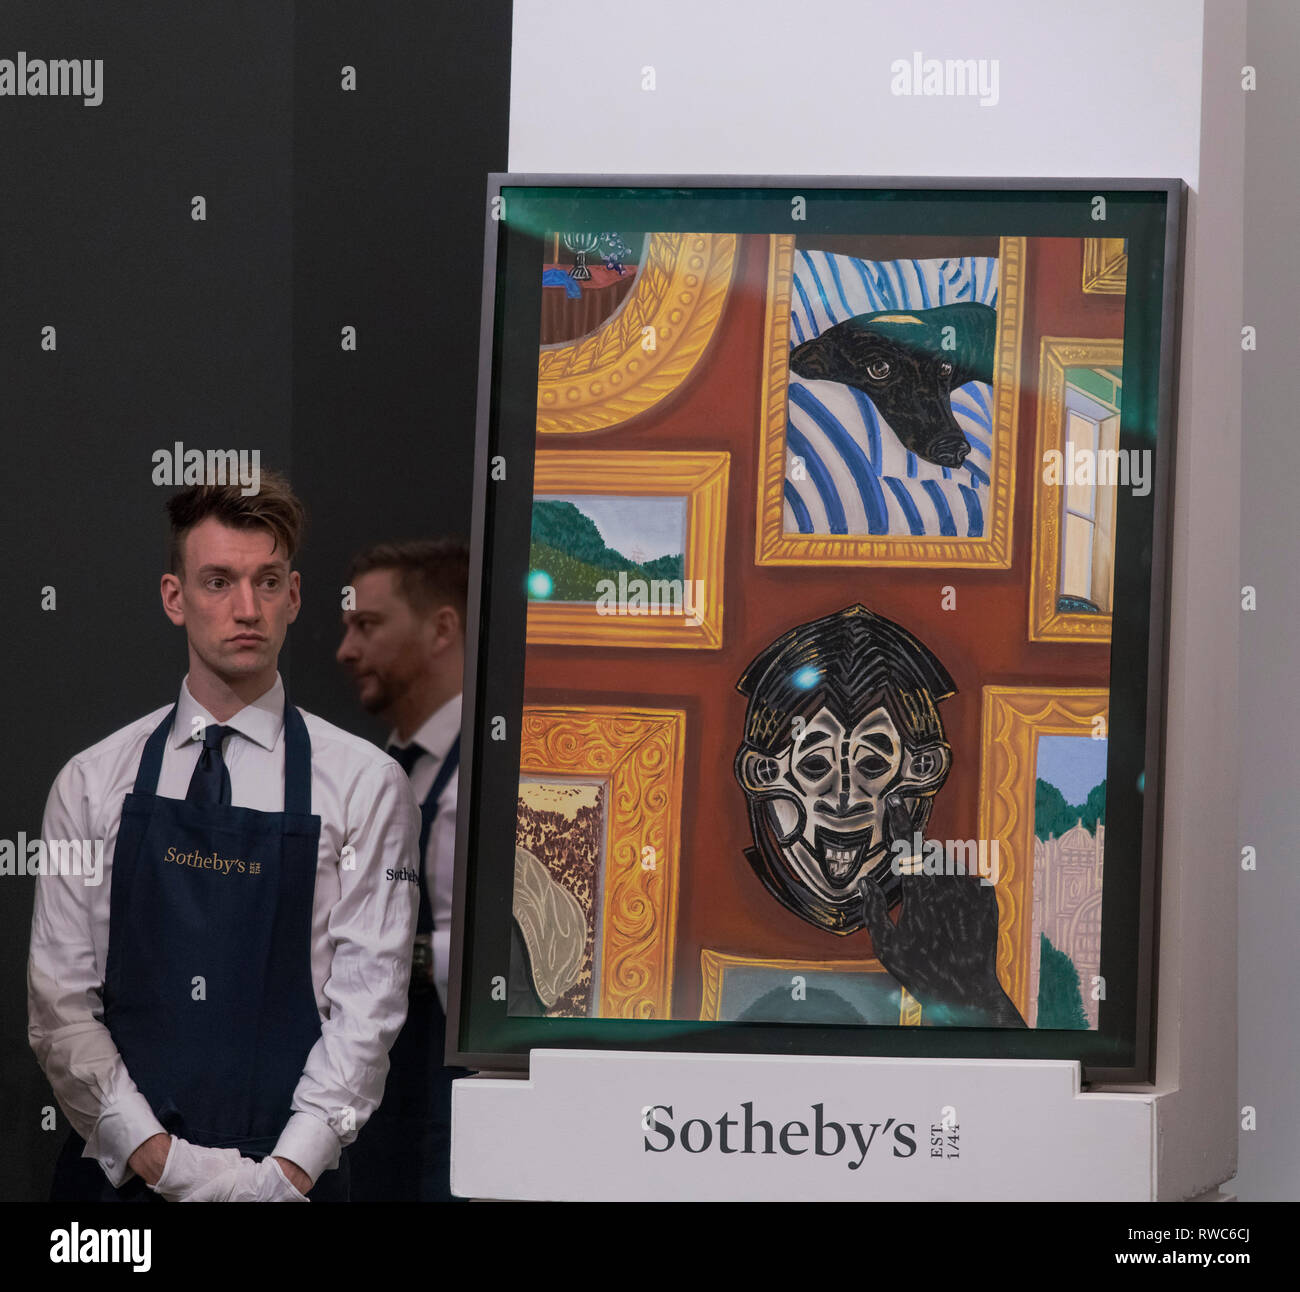 Sotheby’s, New Bond Street, London, UK. 5 March, 2019. In the Contemporary Art evening sale, Toyin Ojih Odutolat’s ‘Selective Histories’ sells for record £250,000. Credit: Malcolm Park/Alamy Live News. Stock Photo